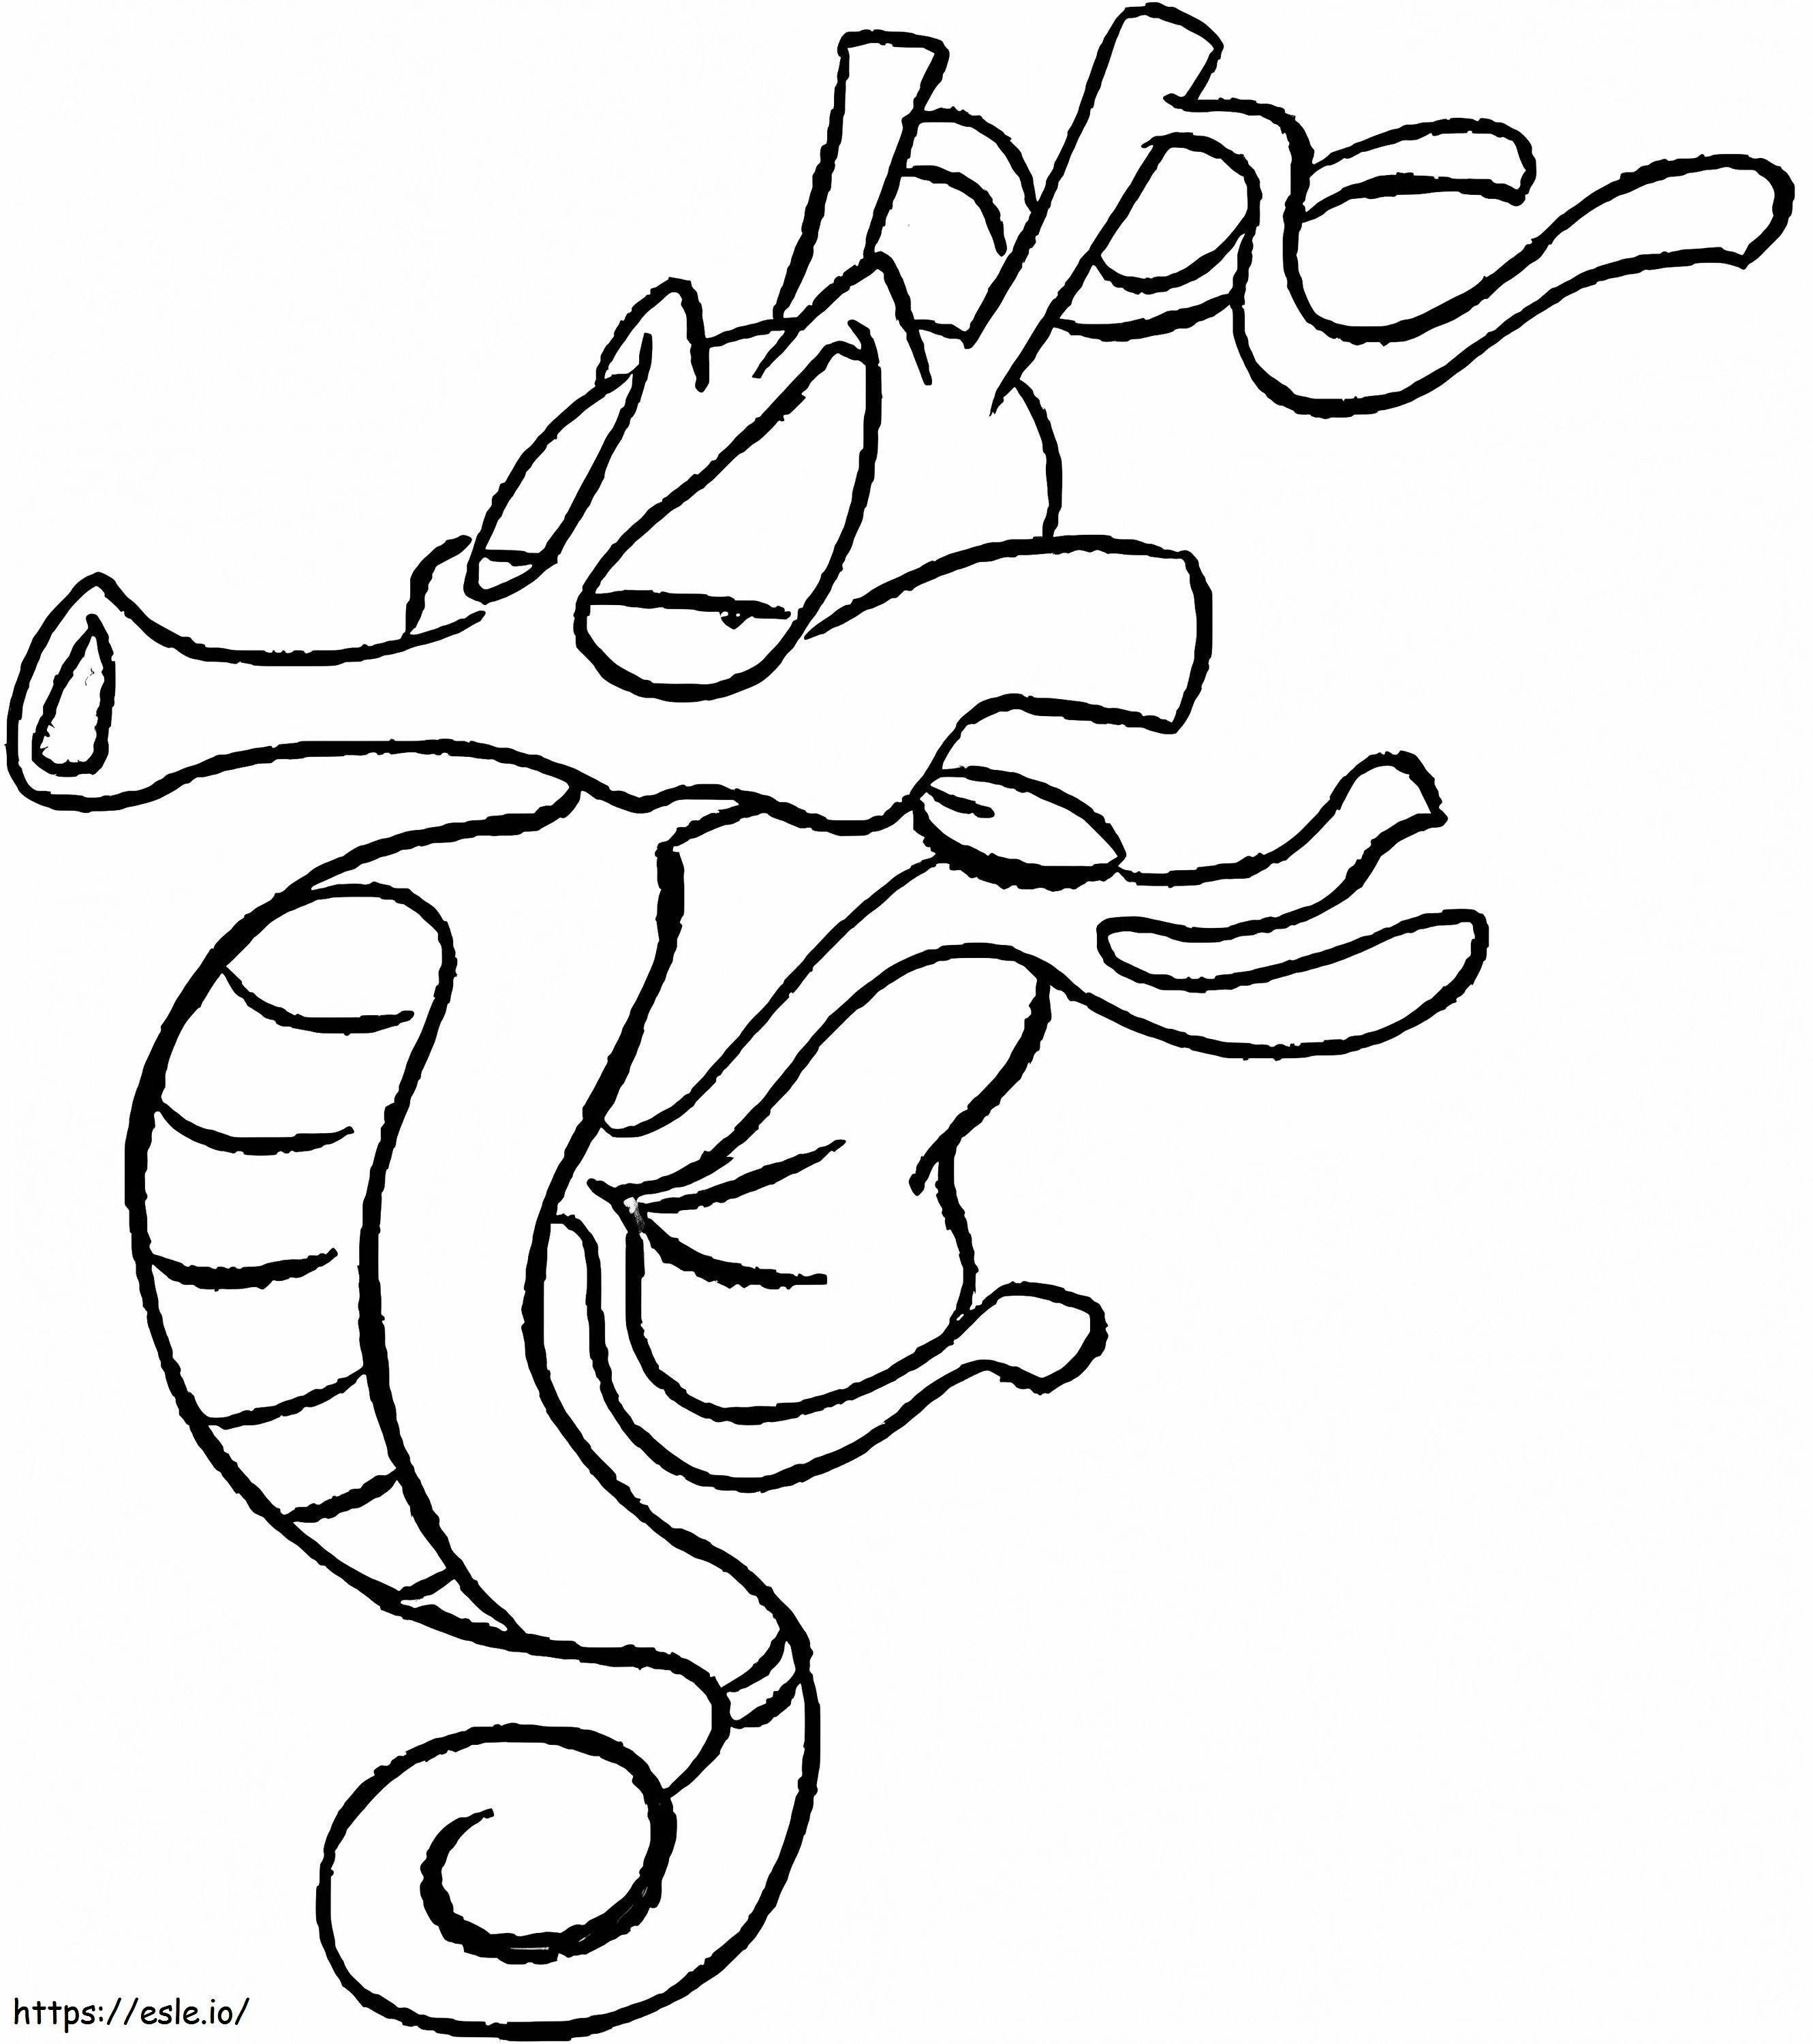 Funny Kingdra coloring page